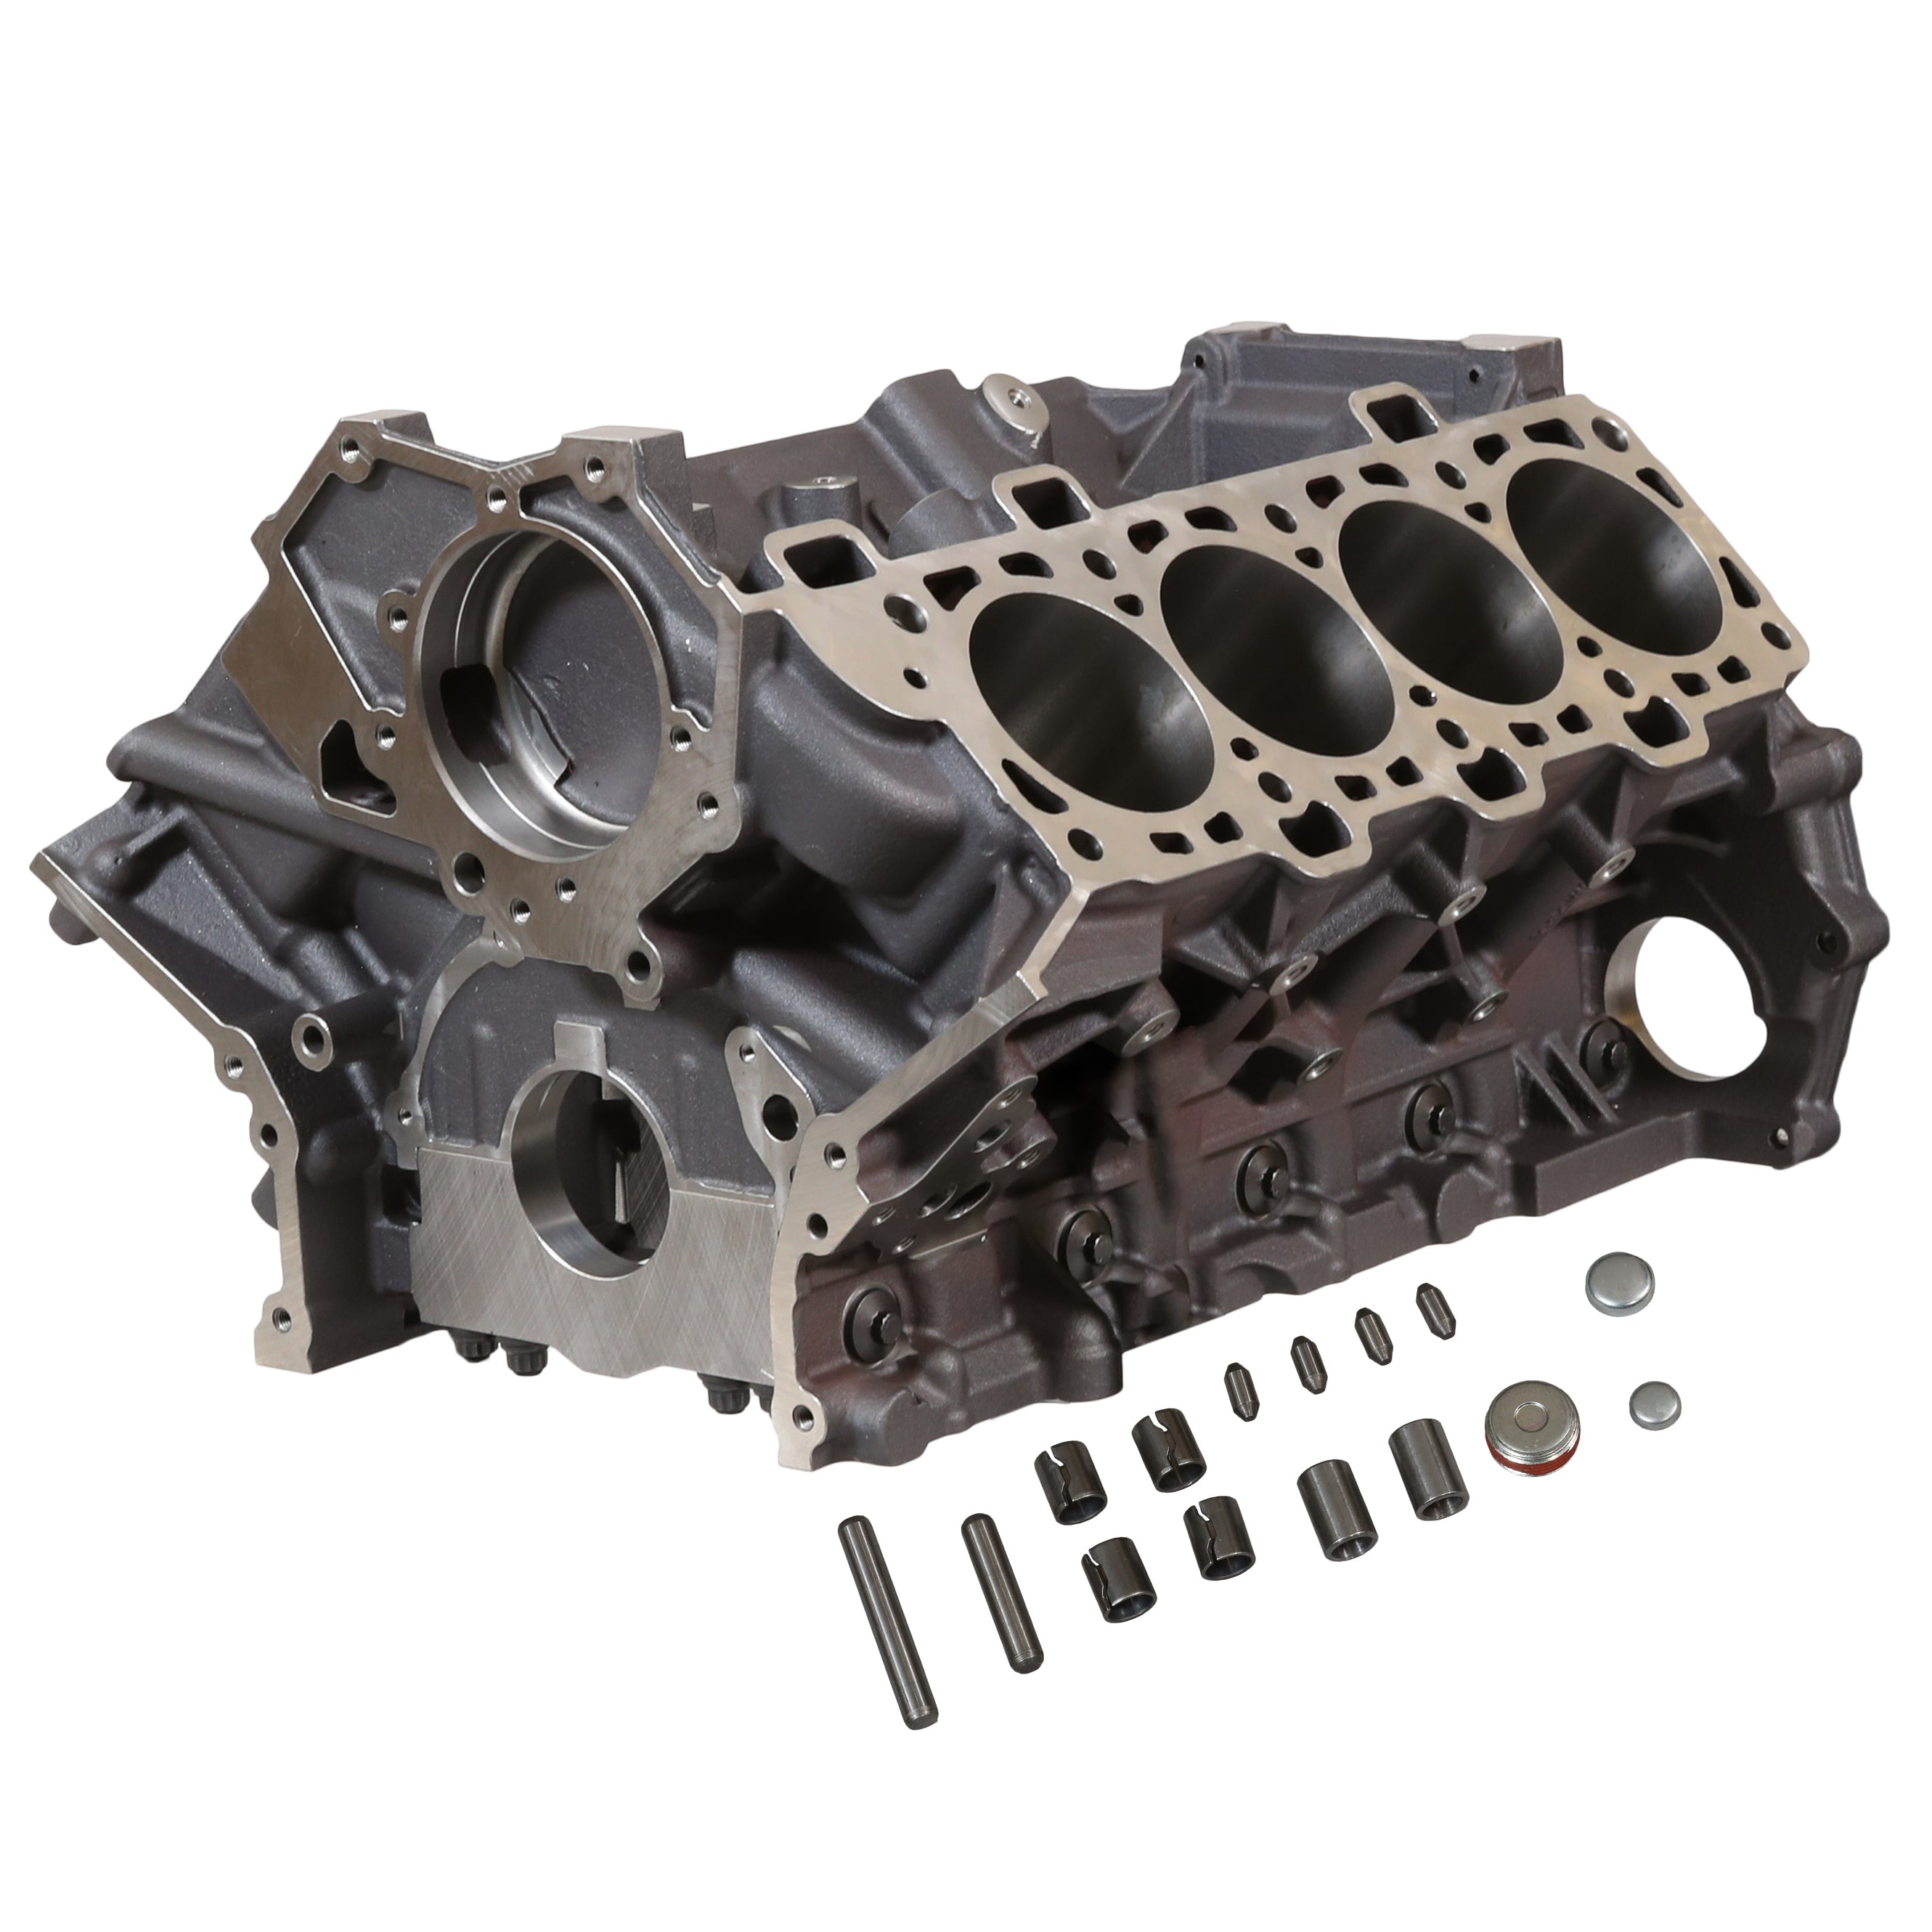 Ford Coyote Iron Block 2011-2017 Engines, Blocks and Components Engines, Bare Blocks main image